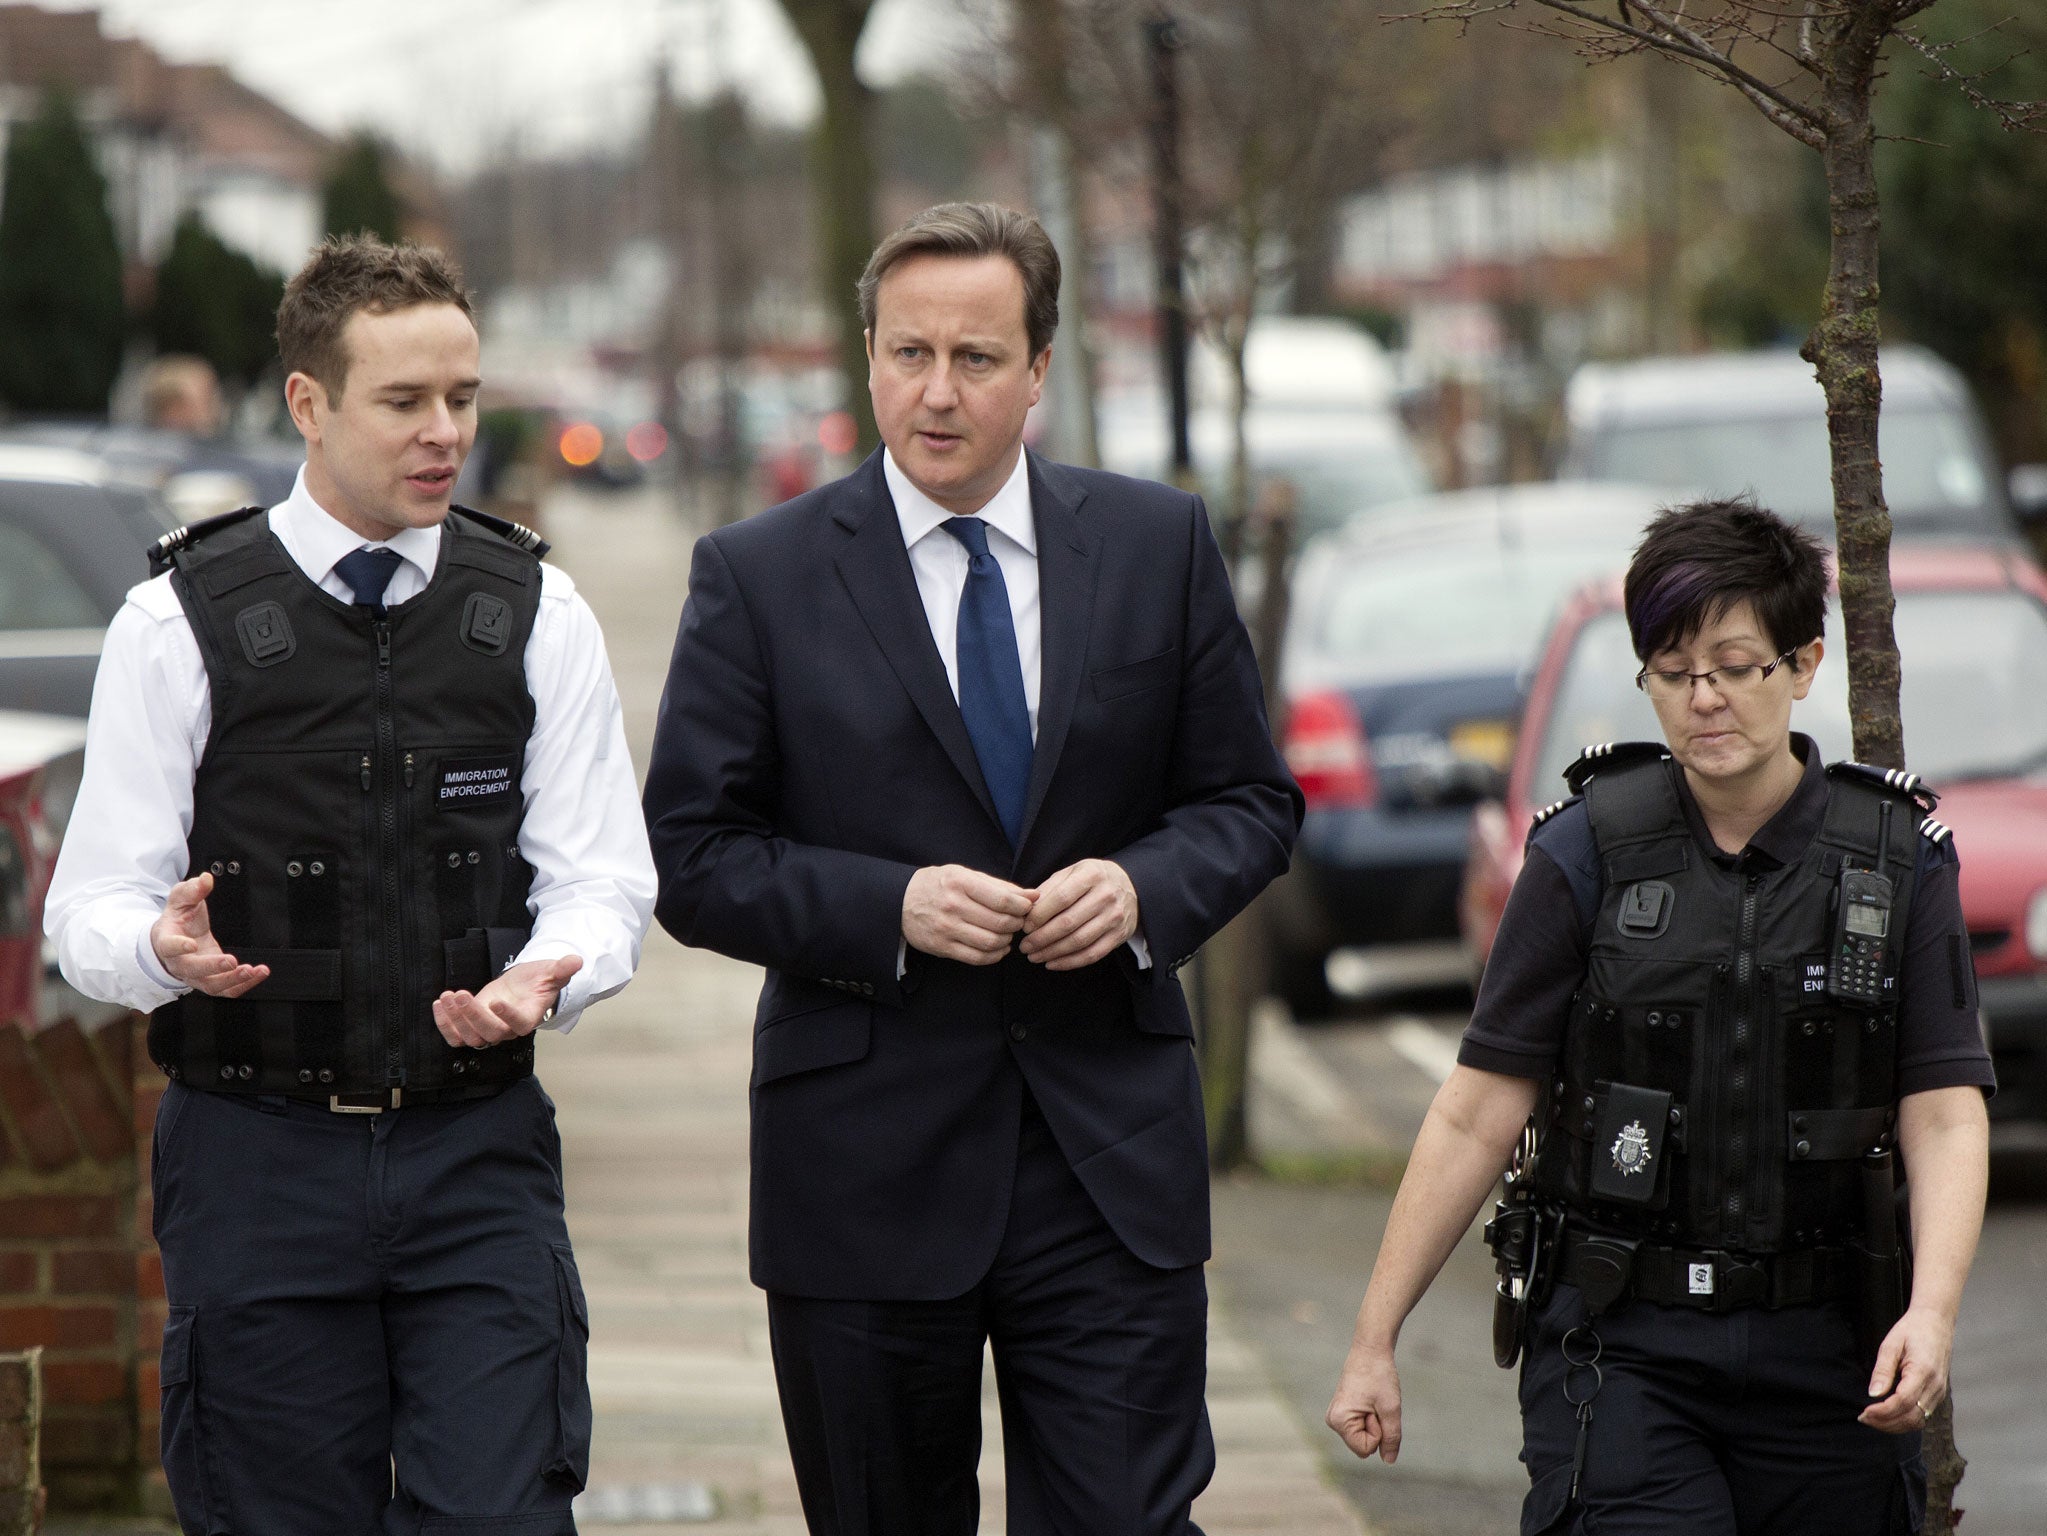 David Cameron visits a house in which was raided by Immigration officers on 18 December. The Prime Minister has been urged to tone down his language when talking about immigration as it is believed to alienate voters